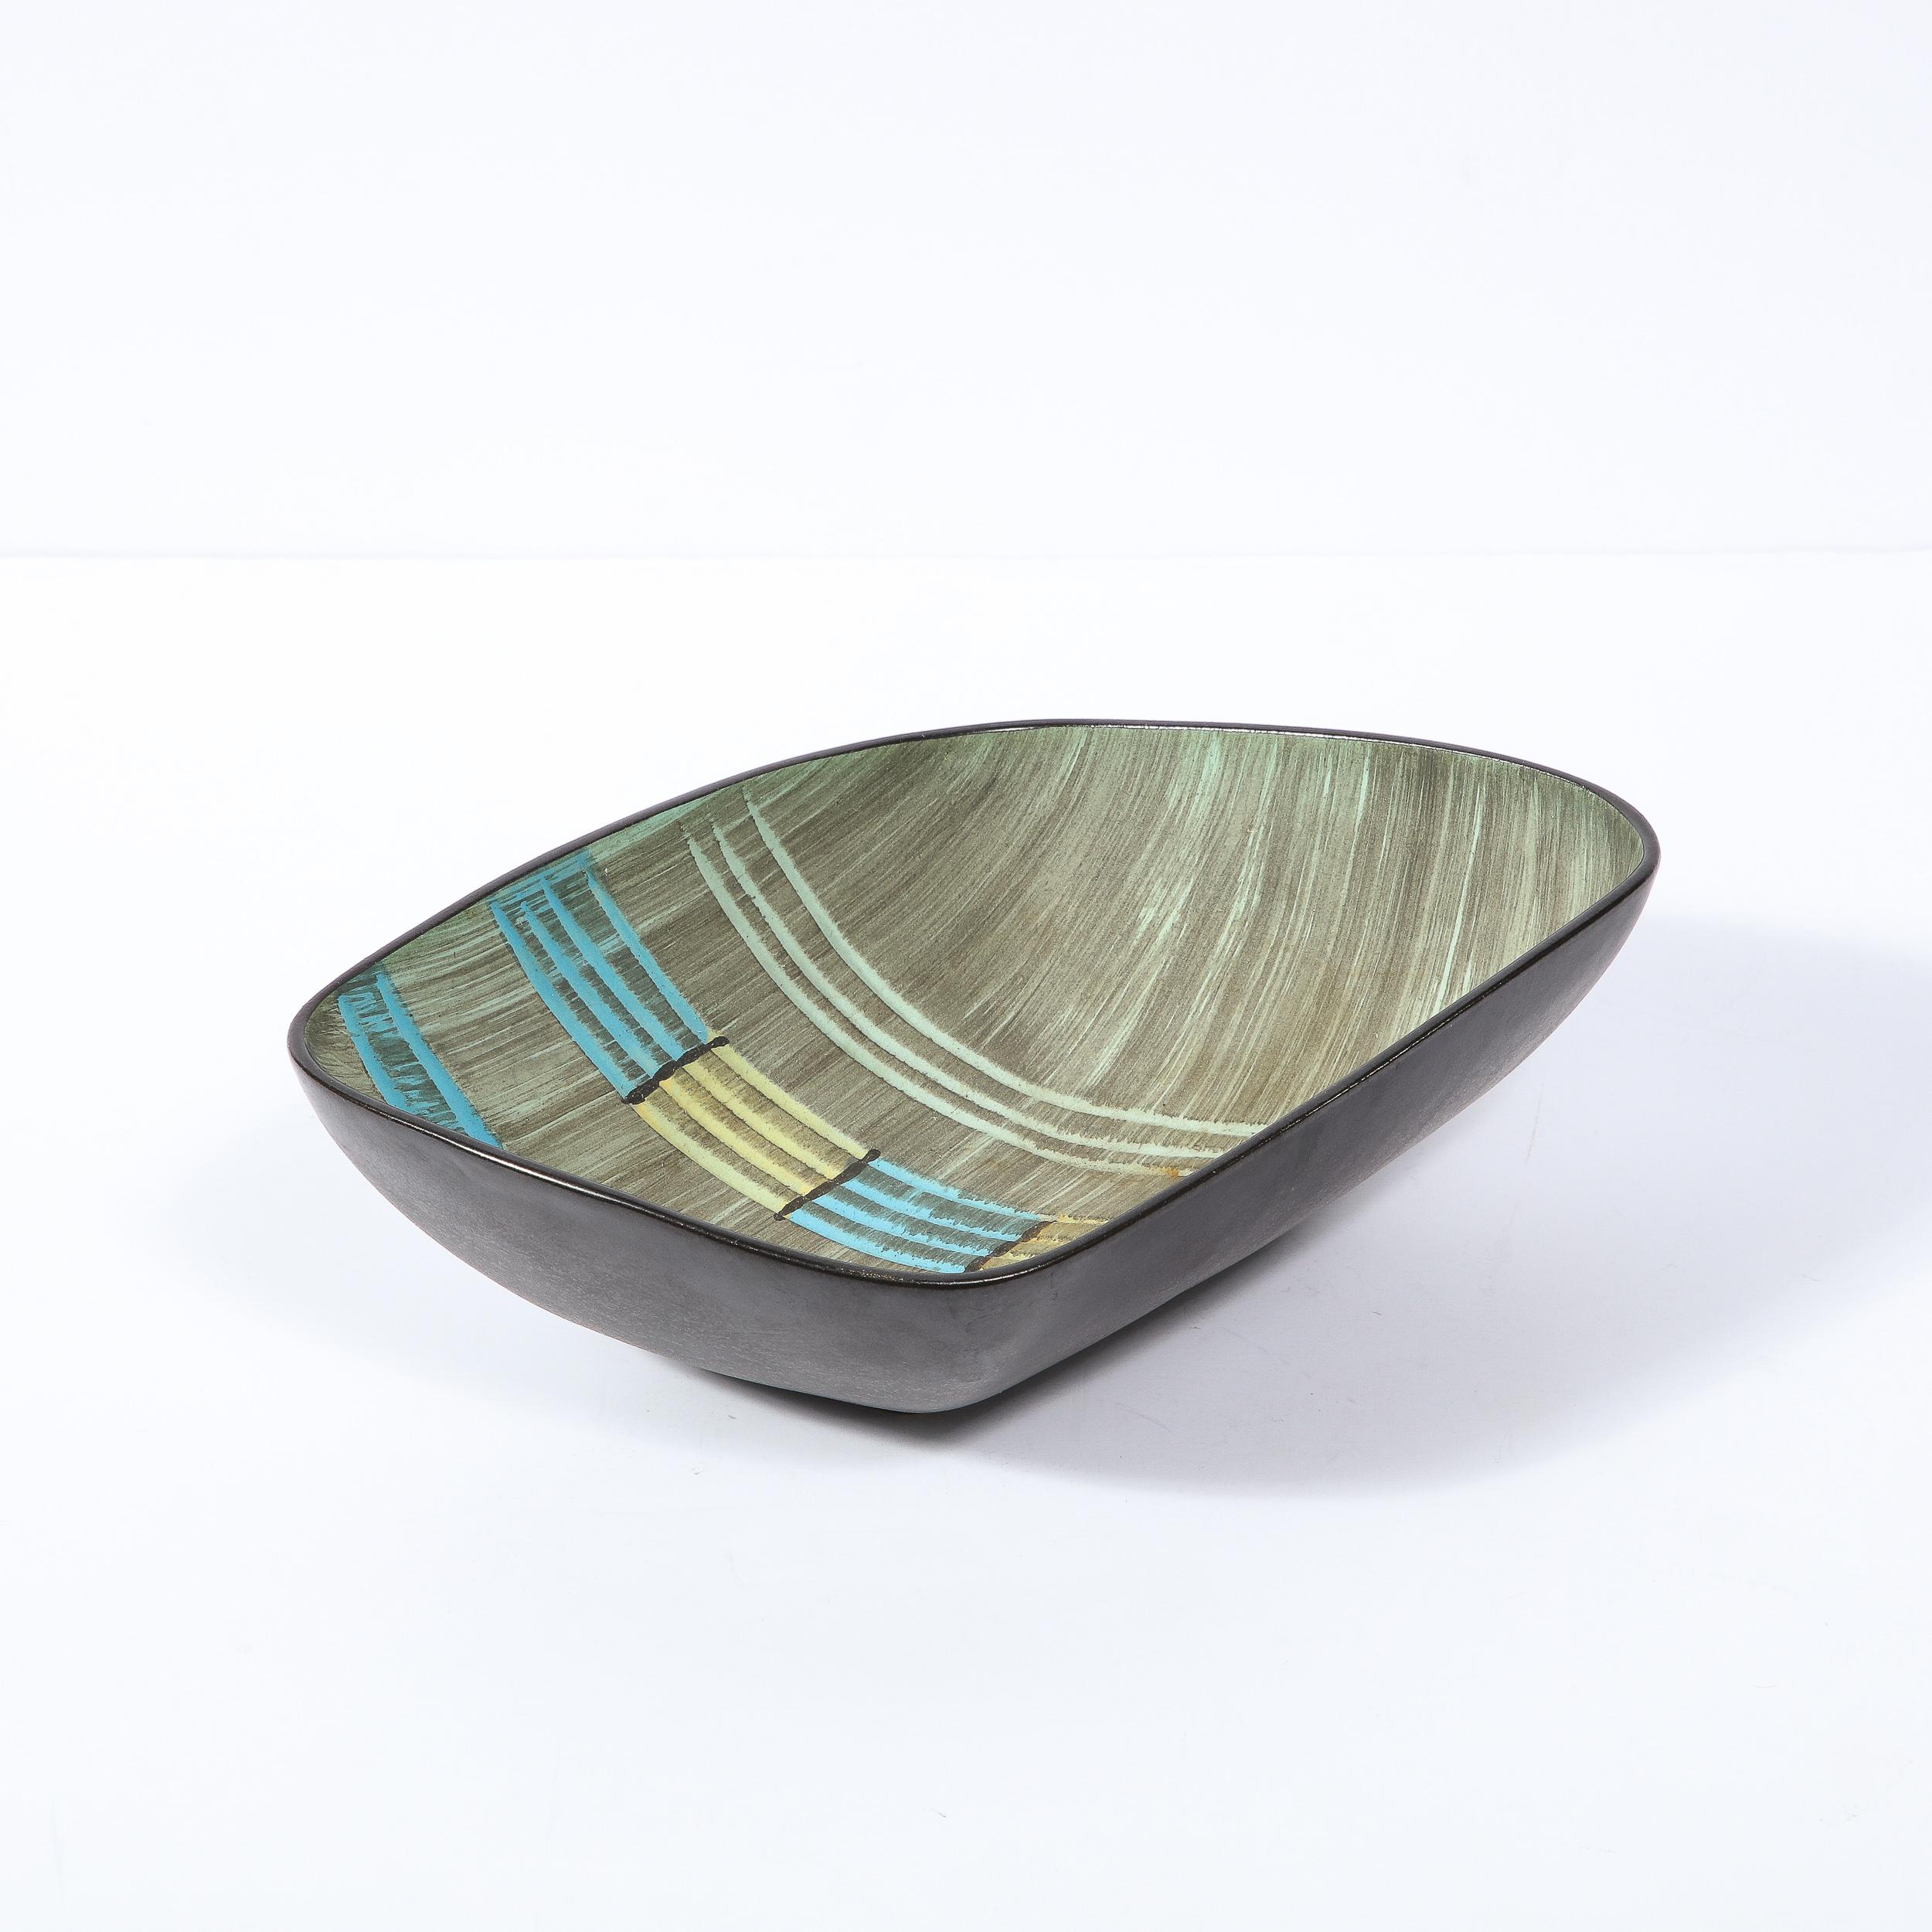 This sophisticated Mid-Century Modern ceramic bowl was realized in Germany circa 1950. It features a rectangular form with raised sides and a concave center with a black exterior and a finely striated gunmetal interior. Geometric banded lines in